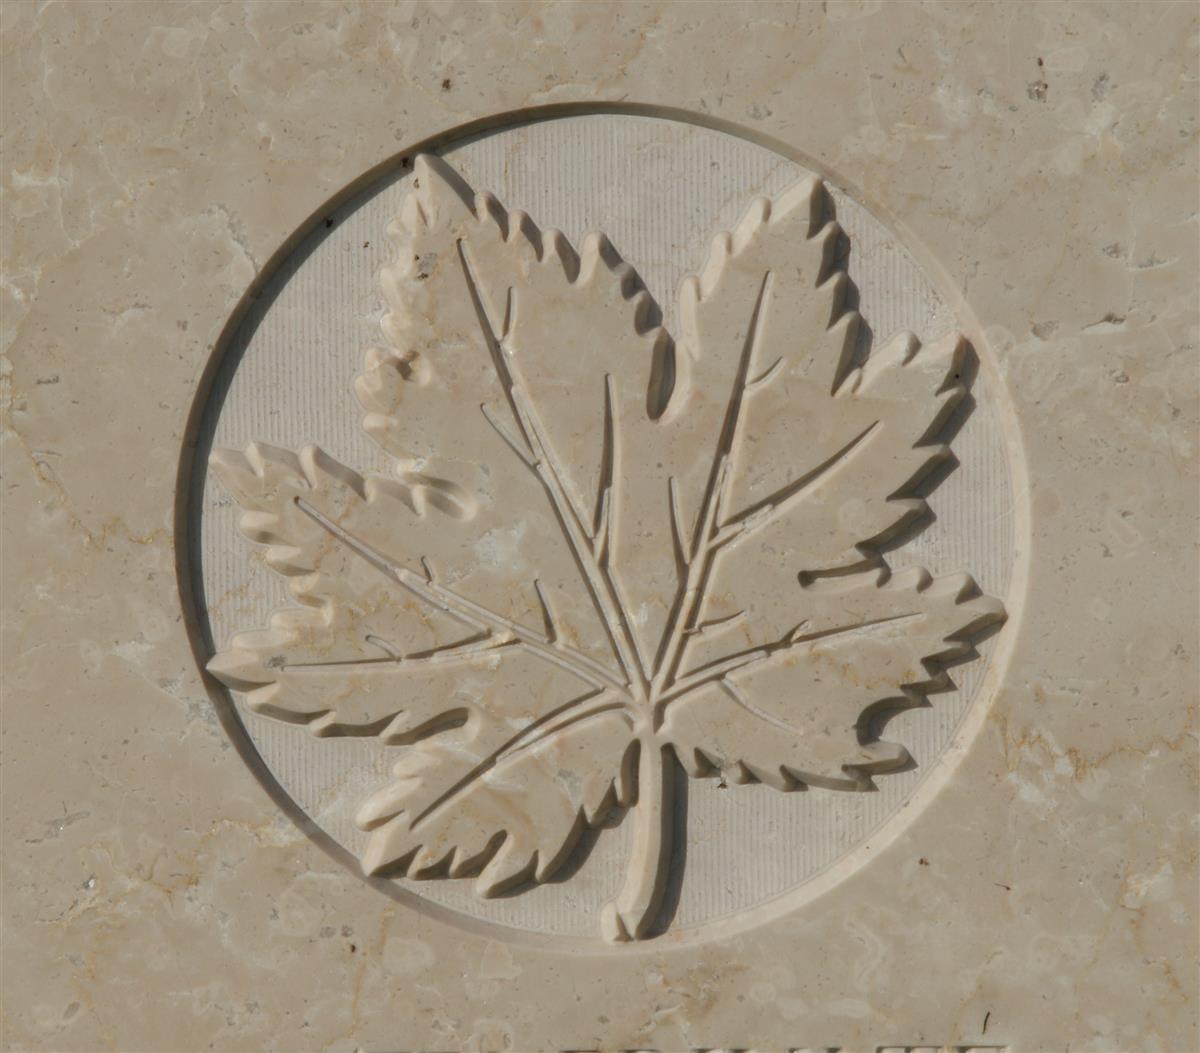 Canadian Expeditionary Force badge